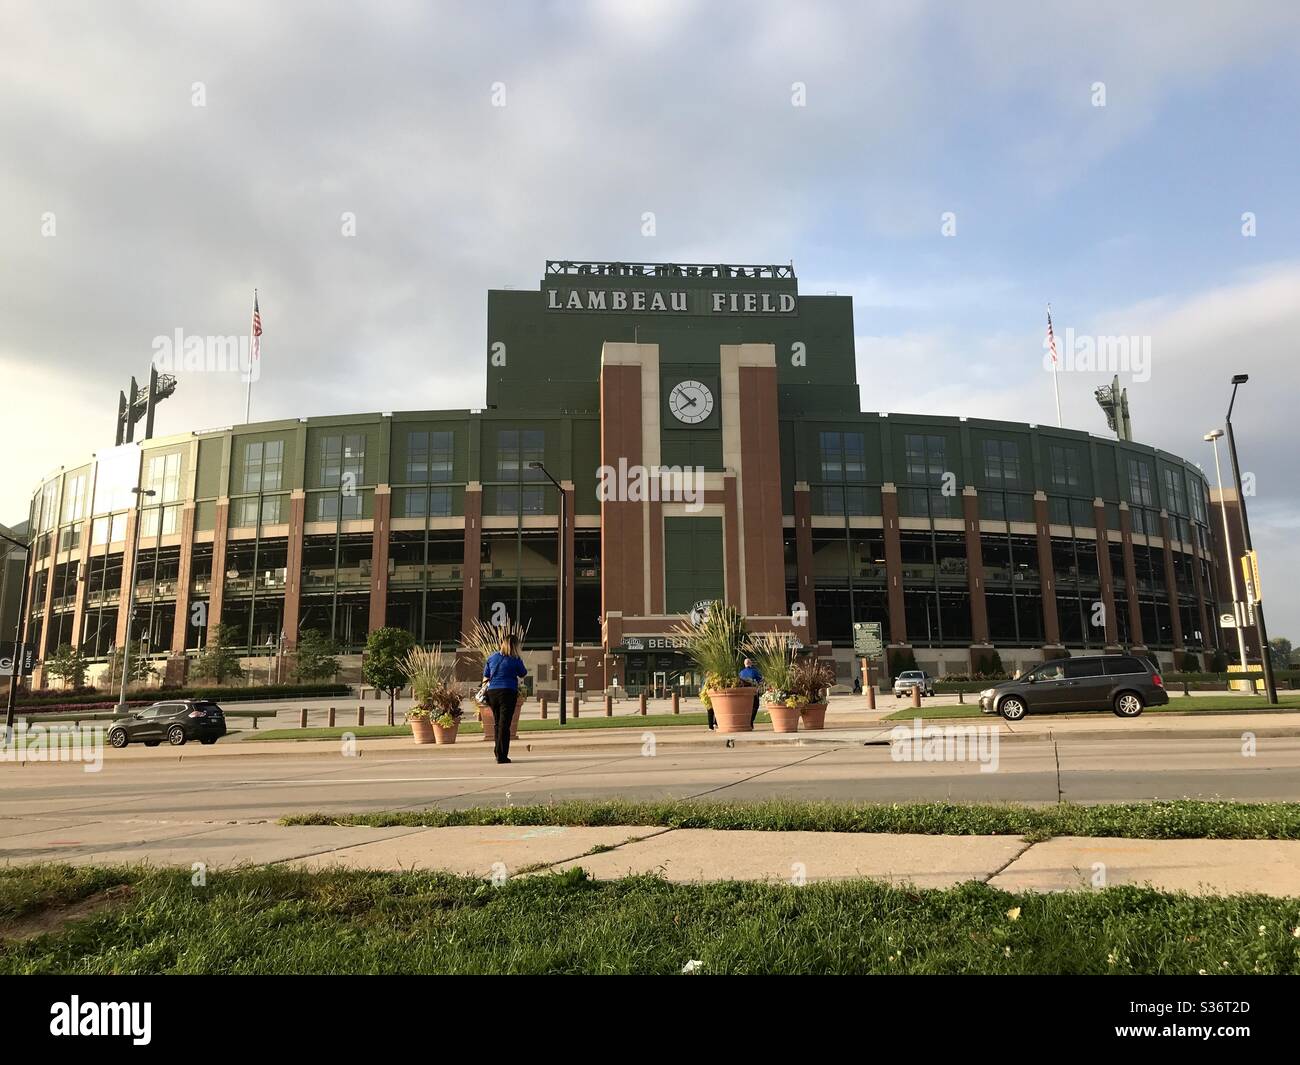 Green Bay, Wisconsin/USA. September 19, 2019. The exterior of the famous American football stadium Lambeau Field- home of the Green Bay Packers. Stock Photo